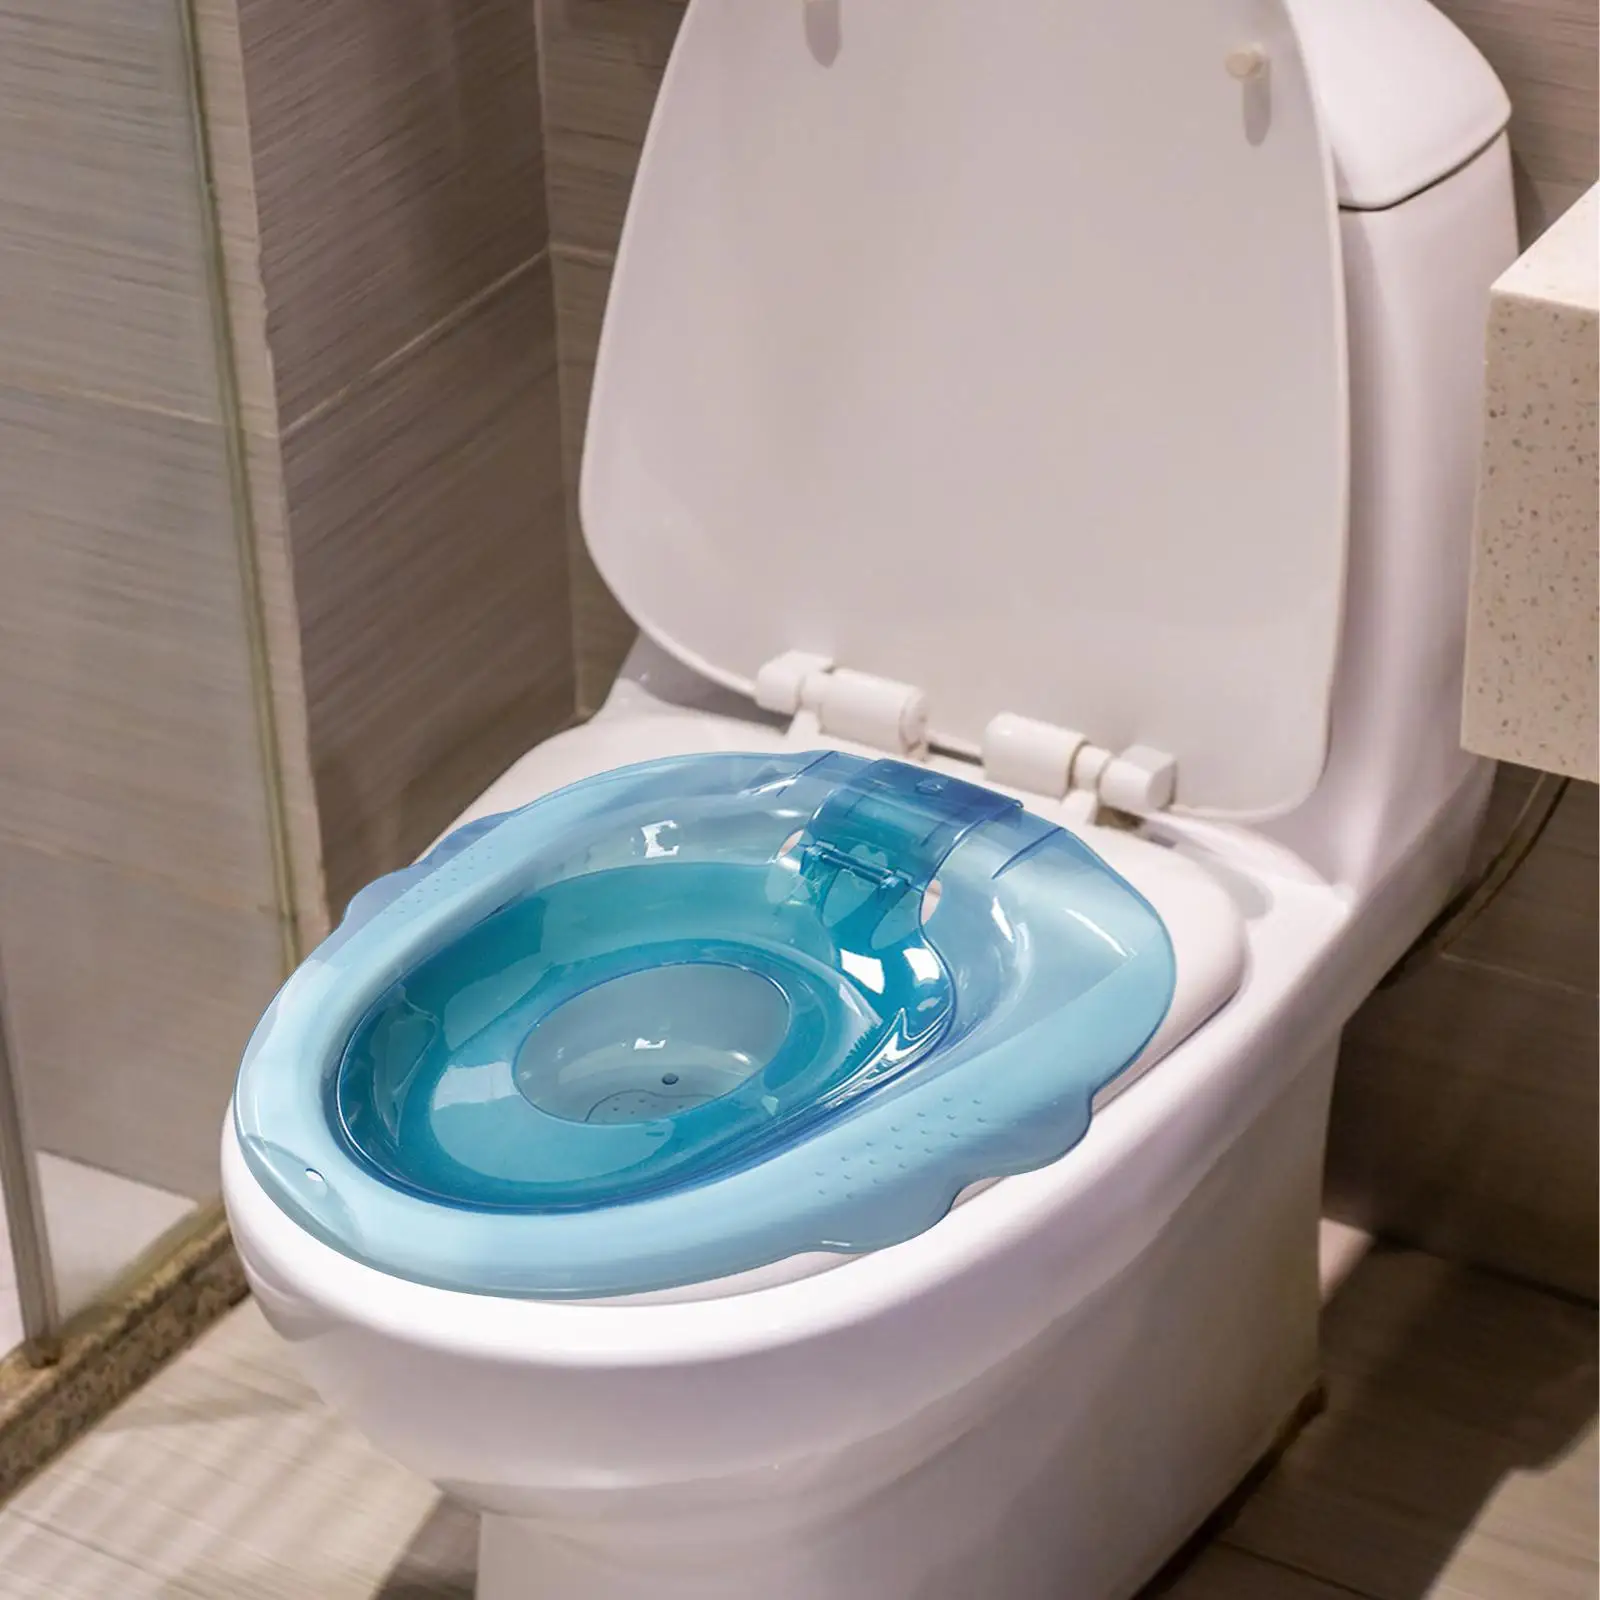 Toilet Seat Sitz Bath Women Bidet Hip Bath Set Wide Seating Area Accessory Avoid Squats for Standard Toilets and Commode Chair